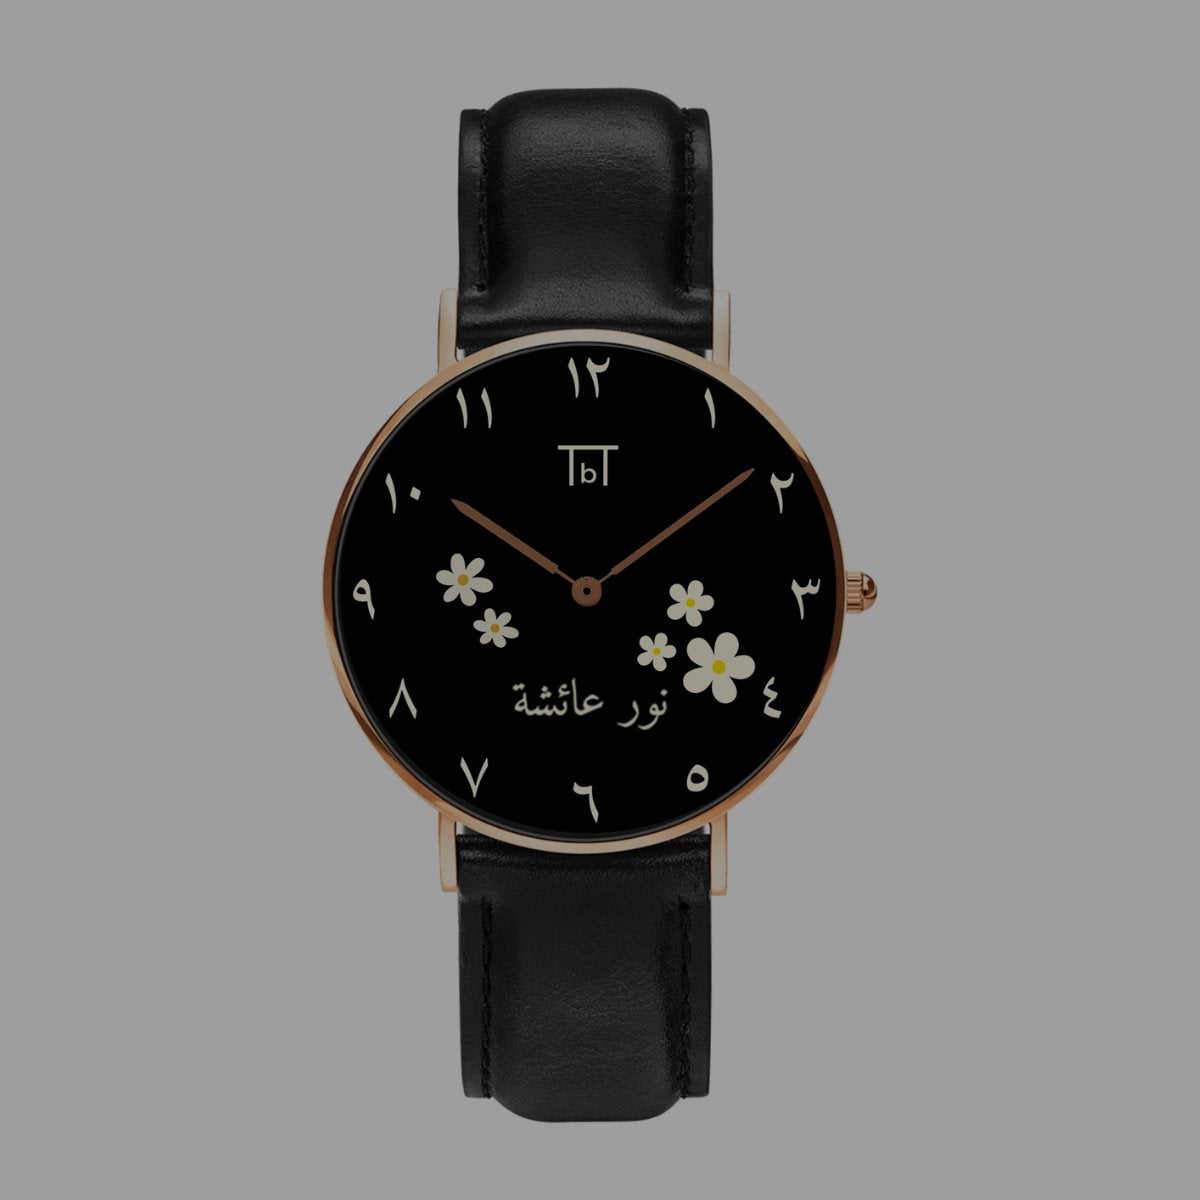 Celebrate with our Islamic gift – the Arabic Rose Gold Watches. Ideal for Ramadan, Eid, Nikkah gifts.